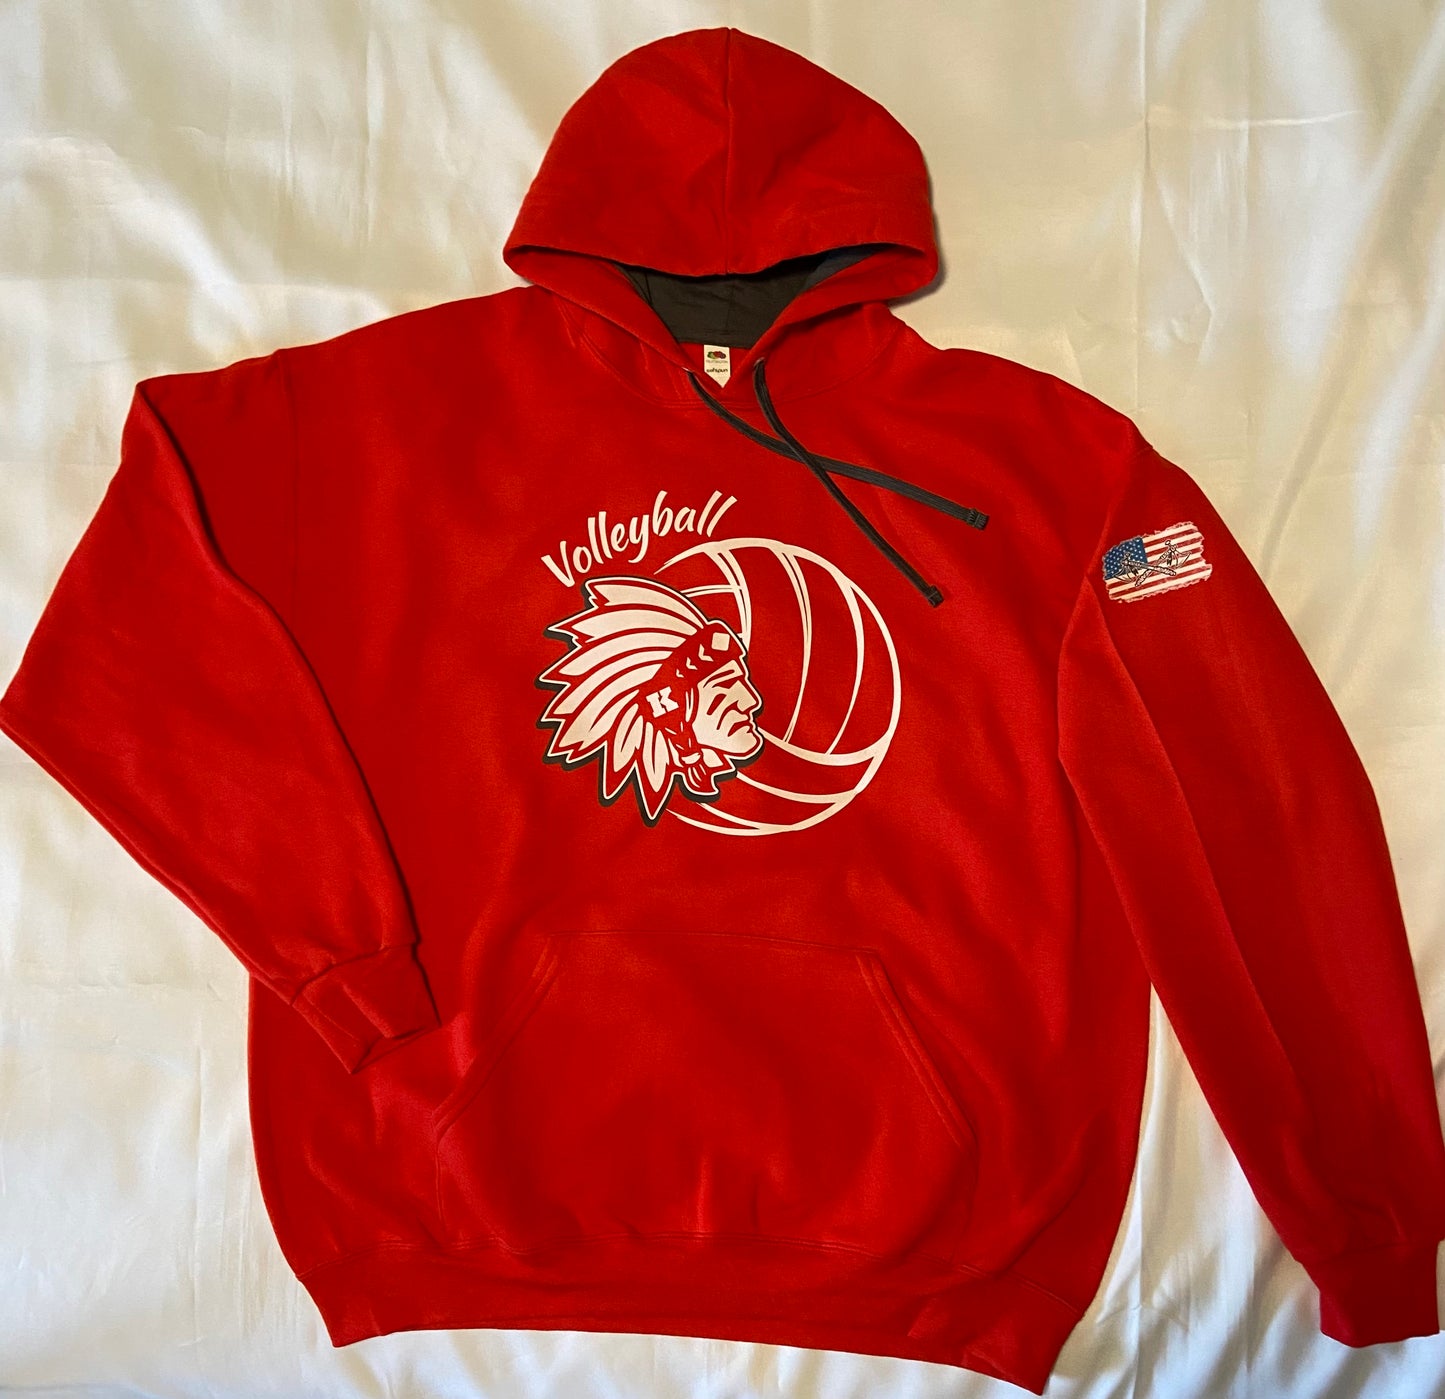 Knox Redskins VOLLEYBALL Hoodie - Red - Adult and Youth Sizes